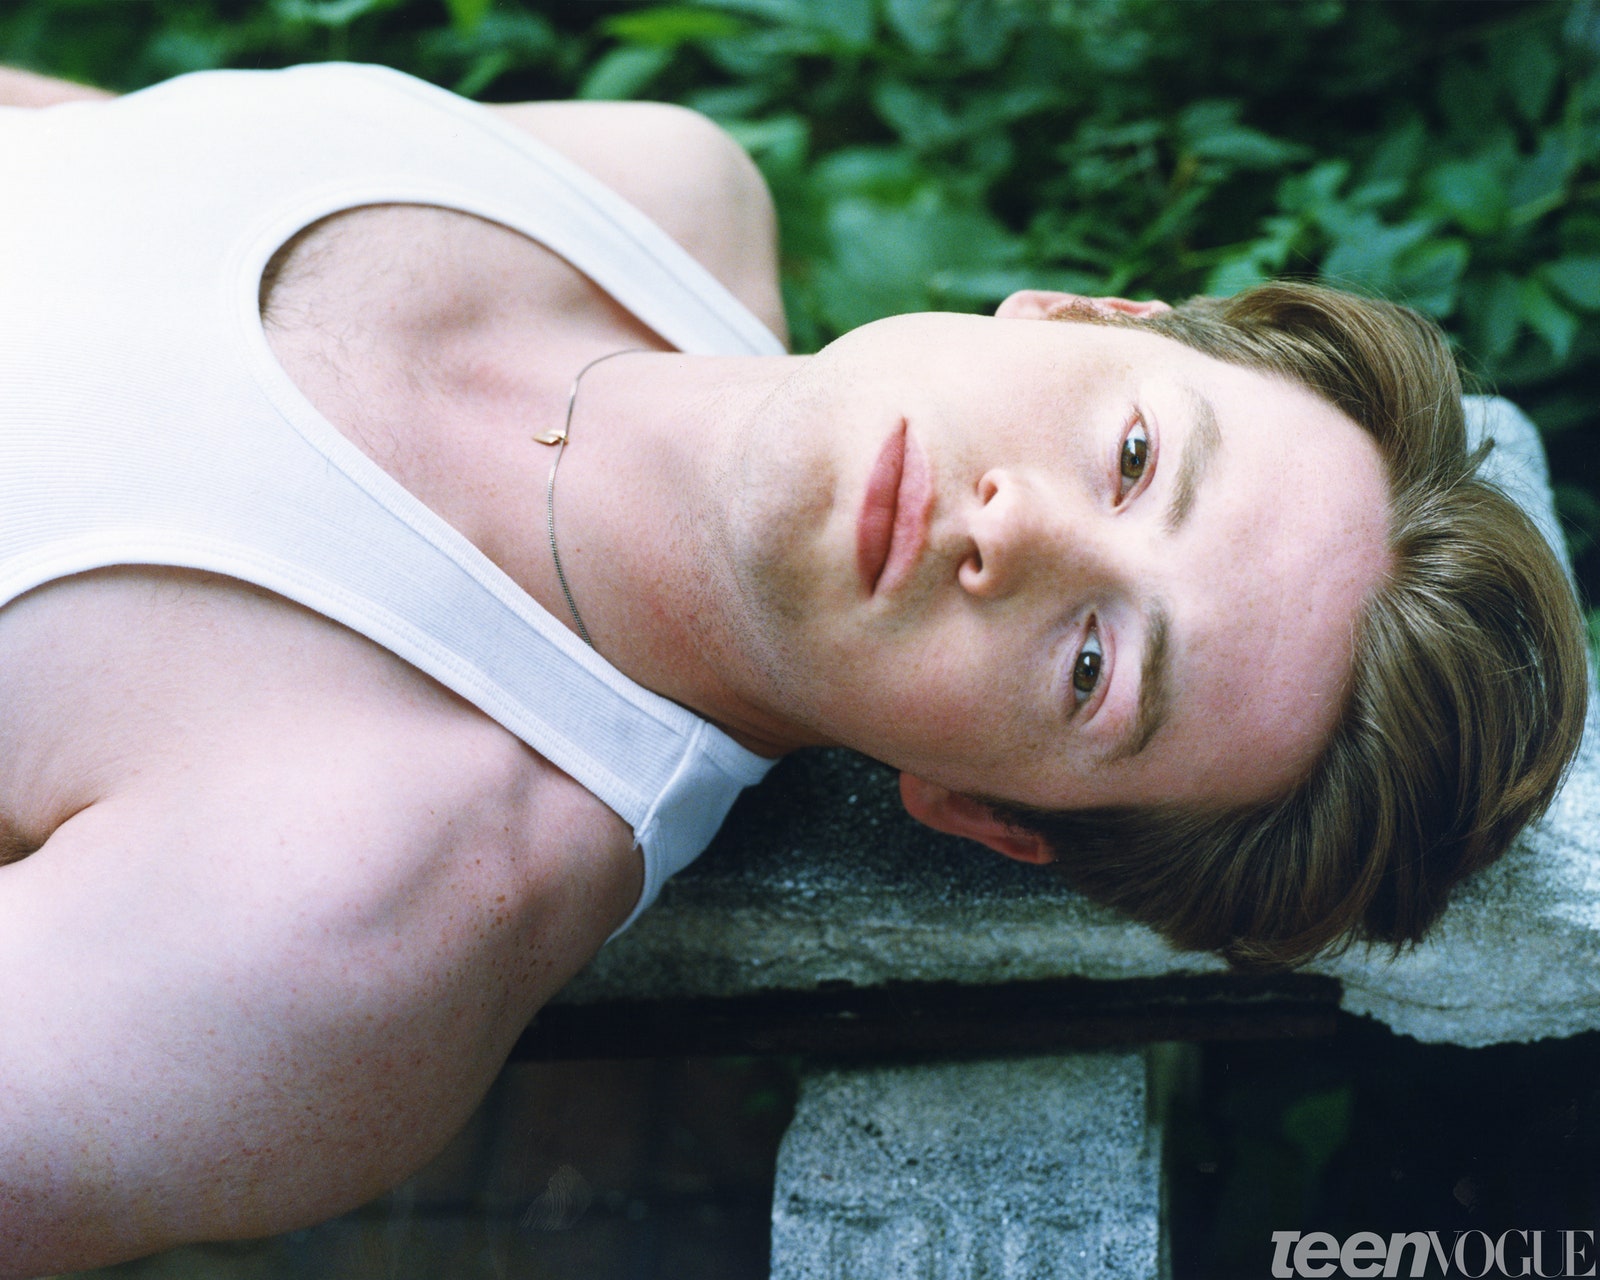 Kit Connor in a white tank top on a bench.